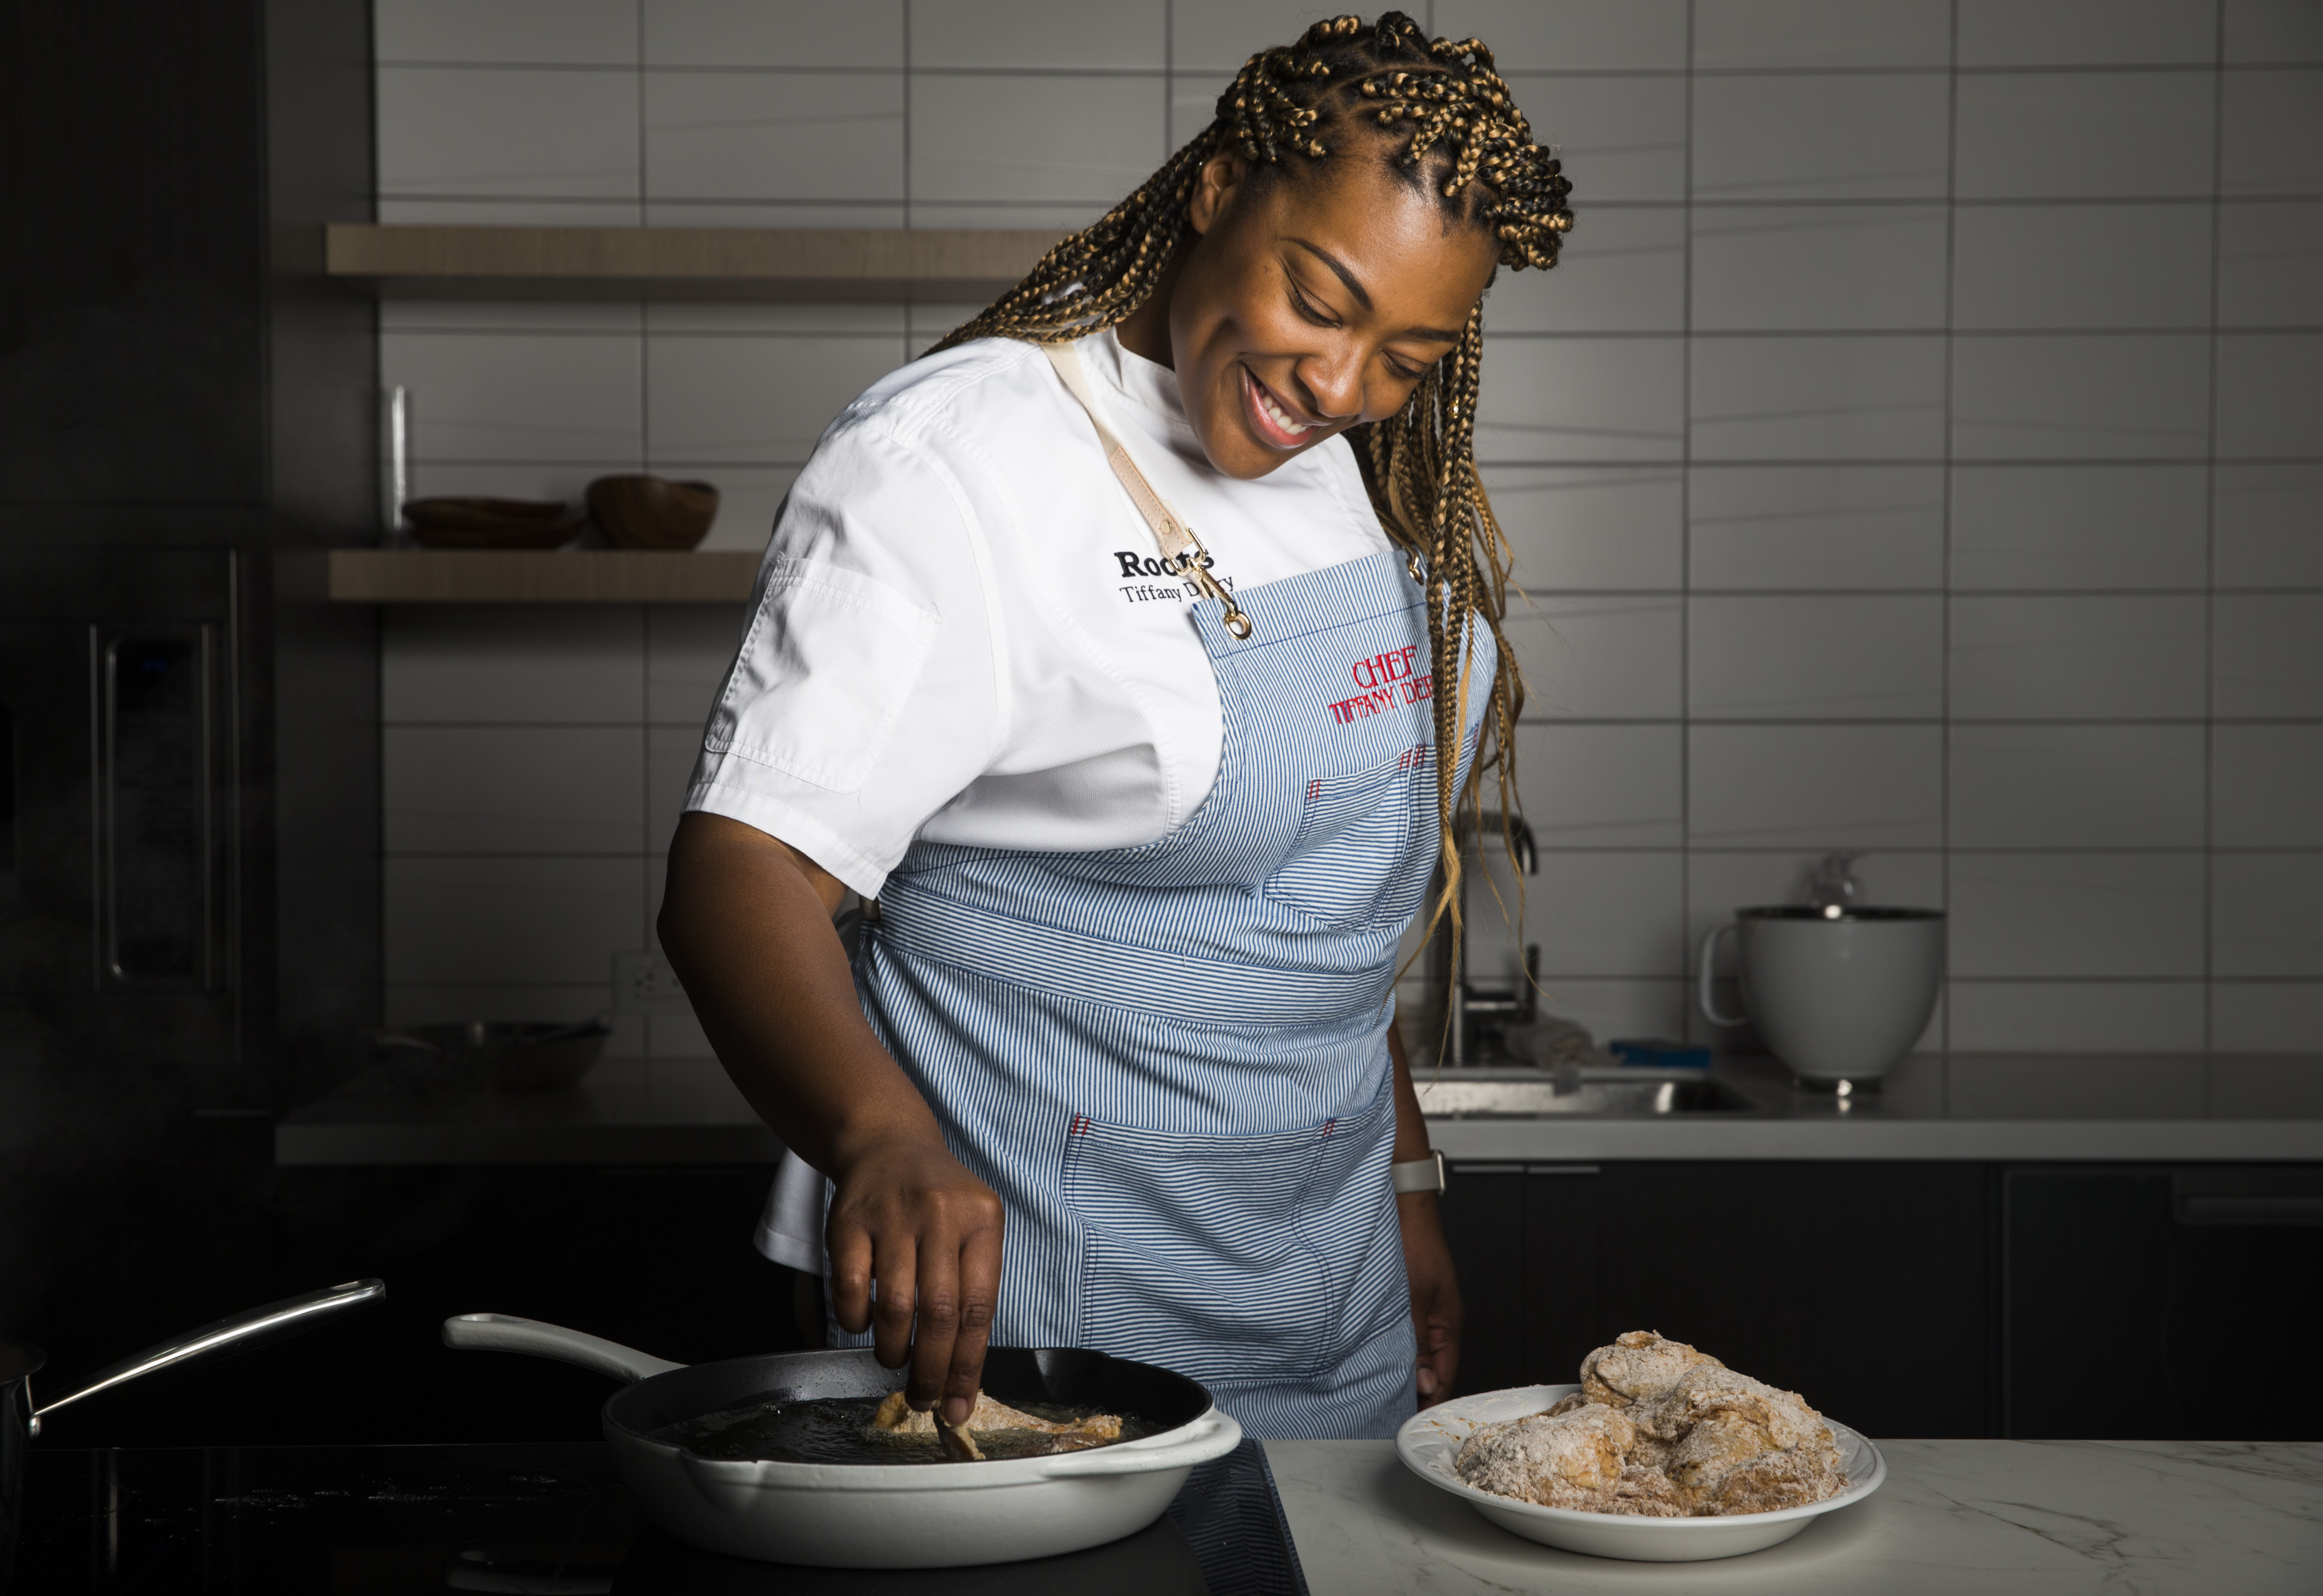 Dallas-area chef Tiffany Derry now offering a gumbo meal kit you